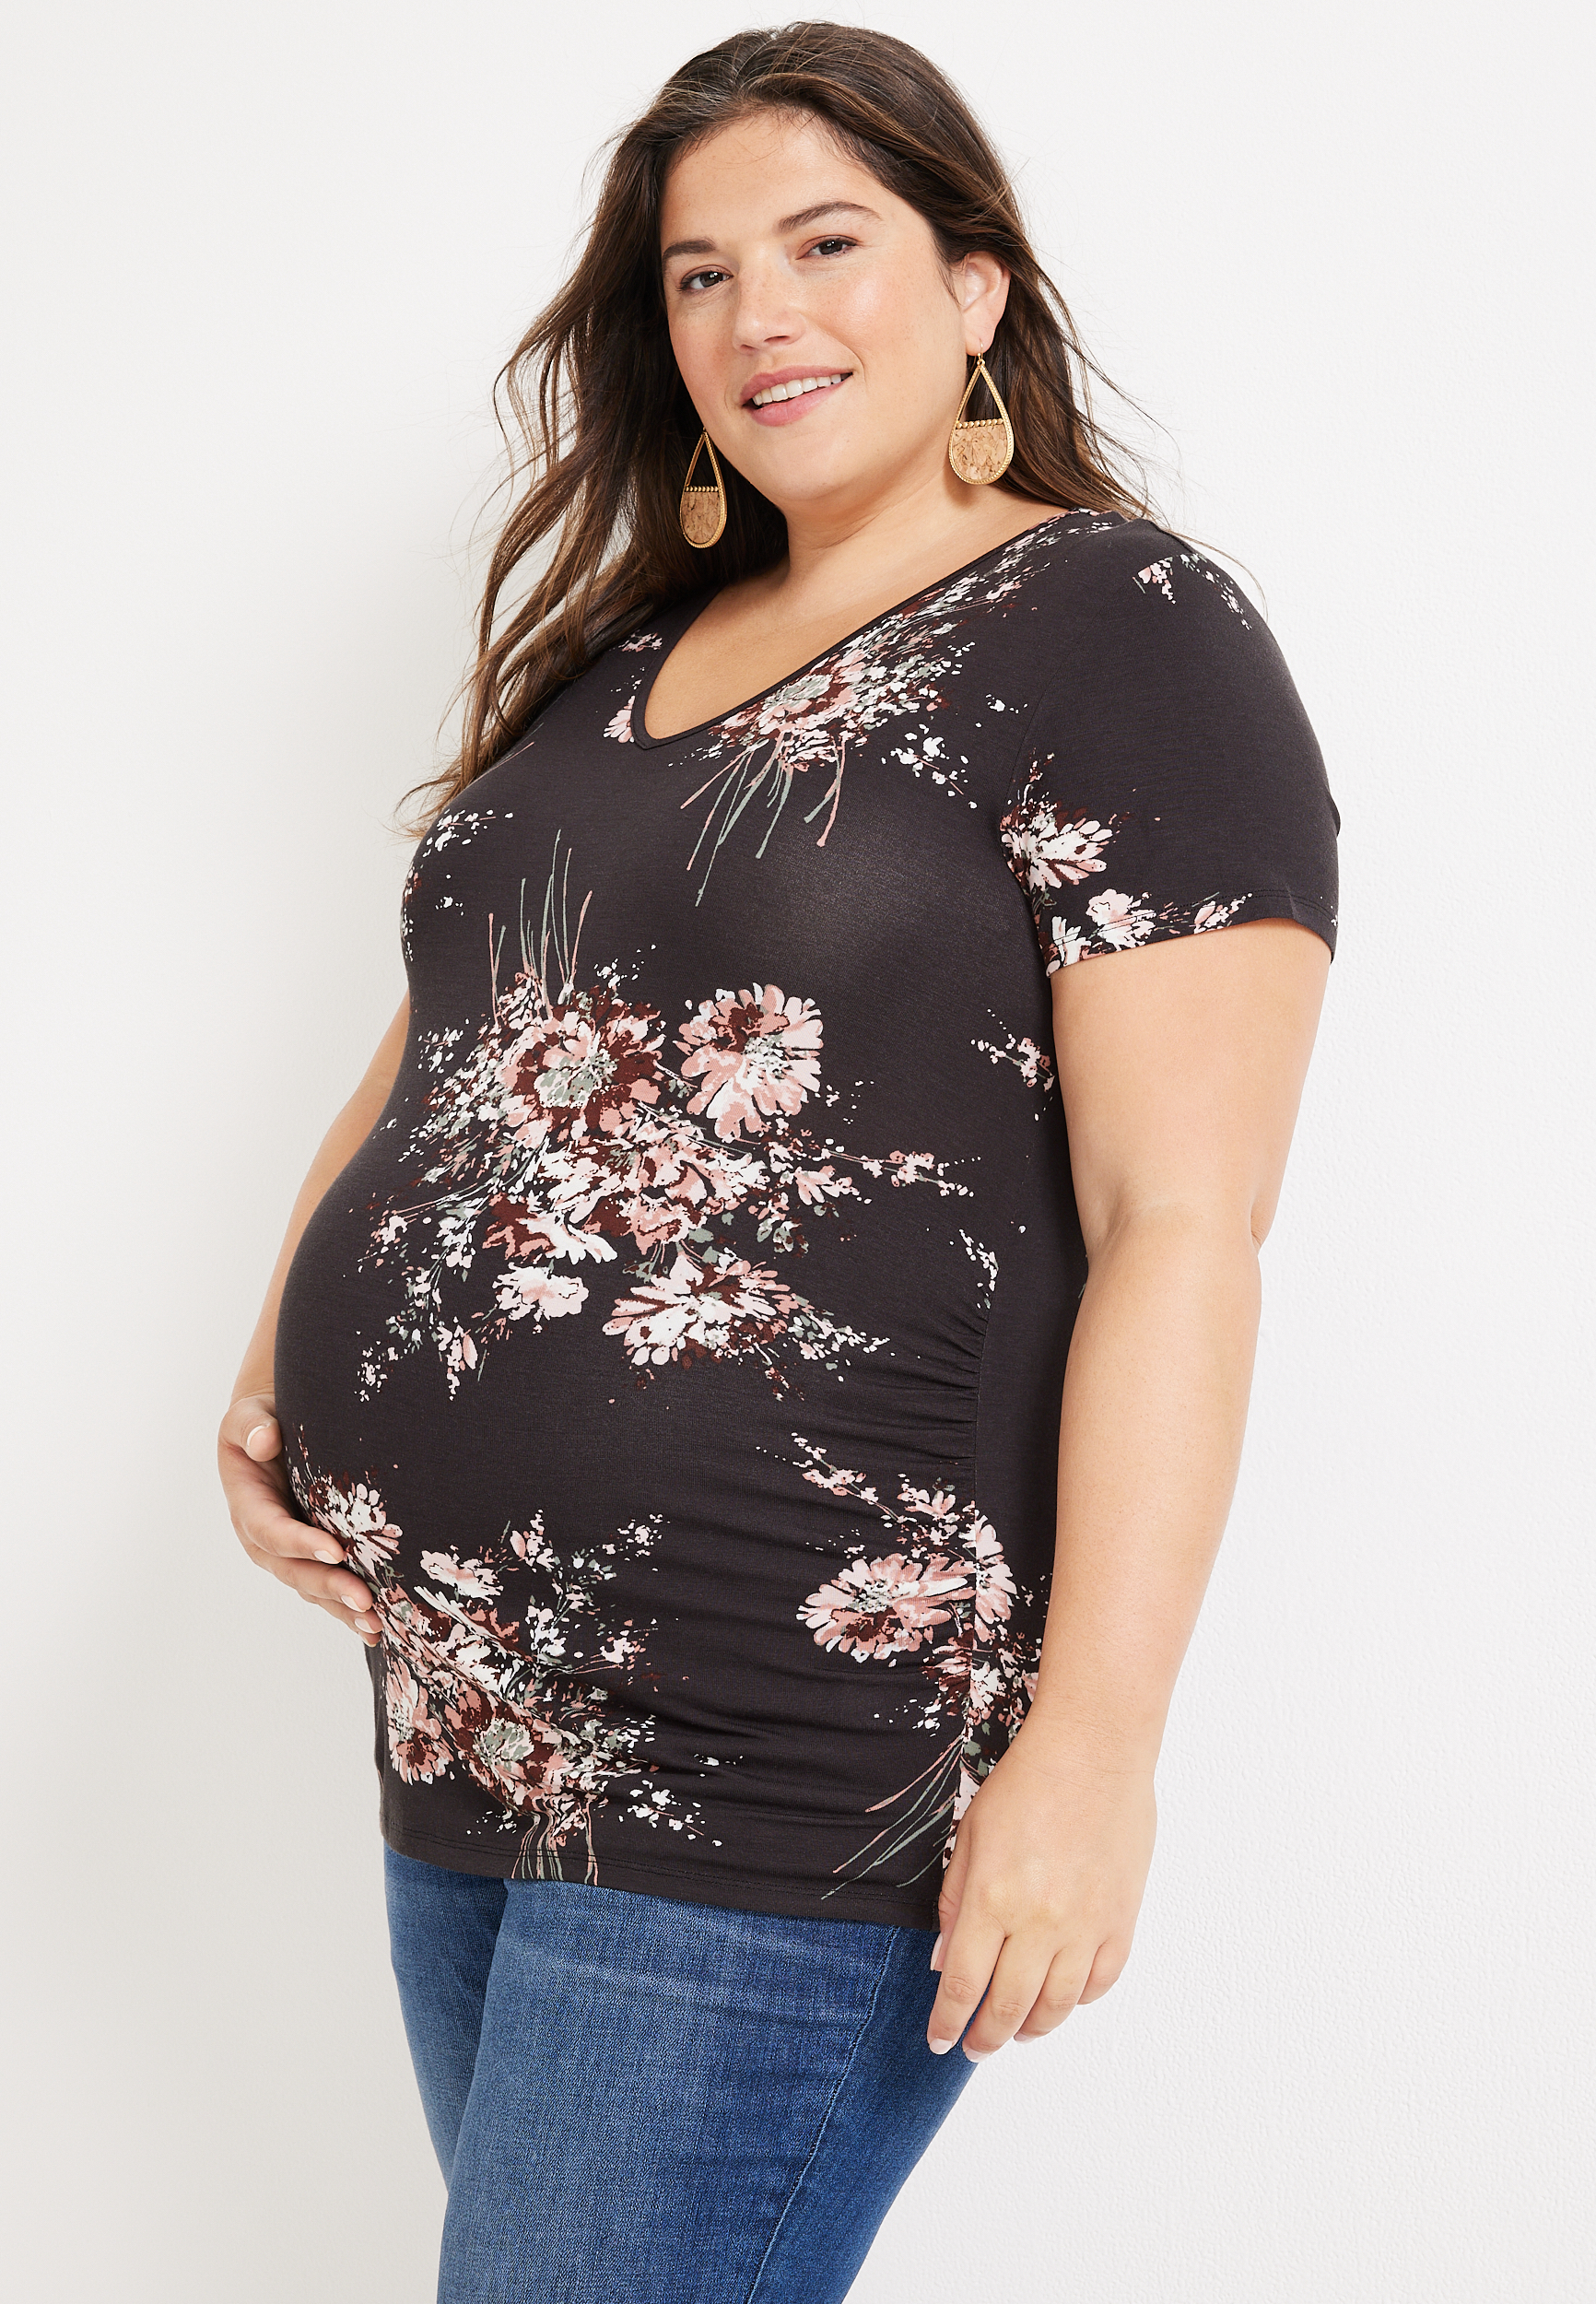 Plus Size Maternity Clothes, Pregnancy Clothing